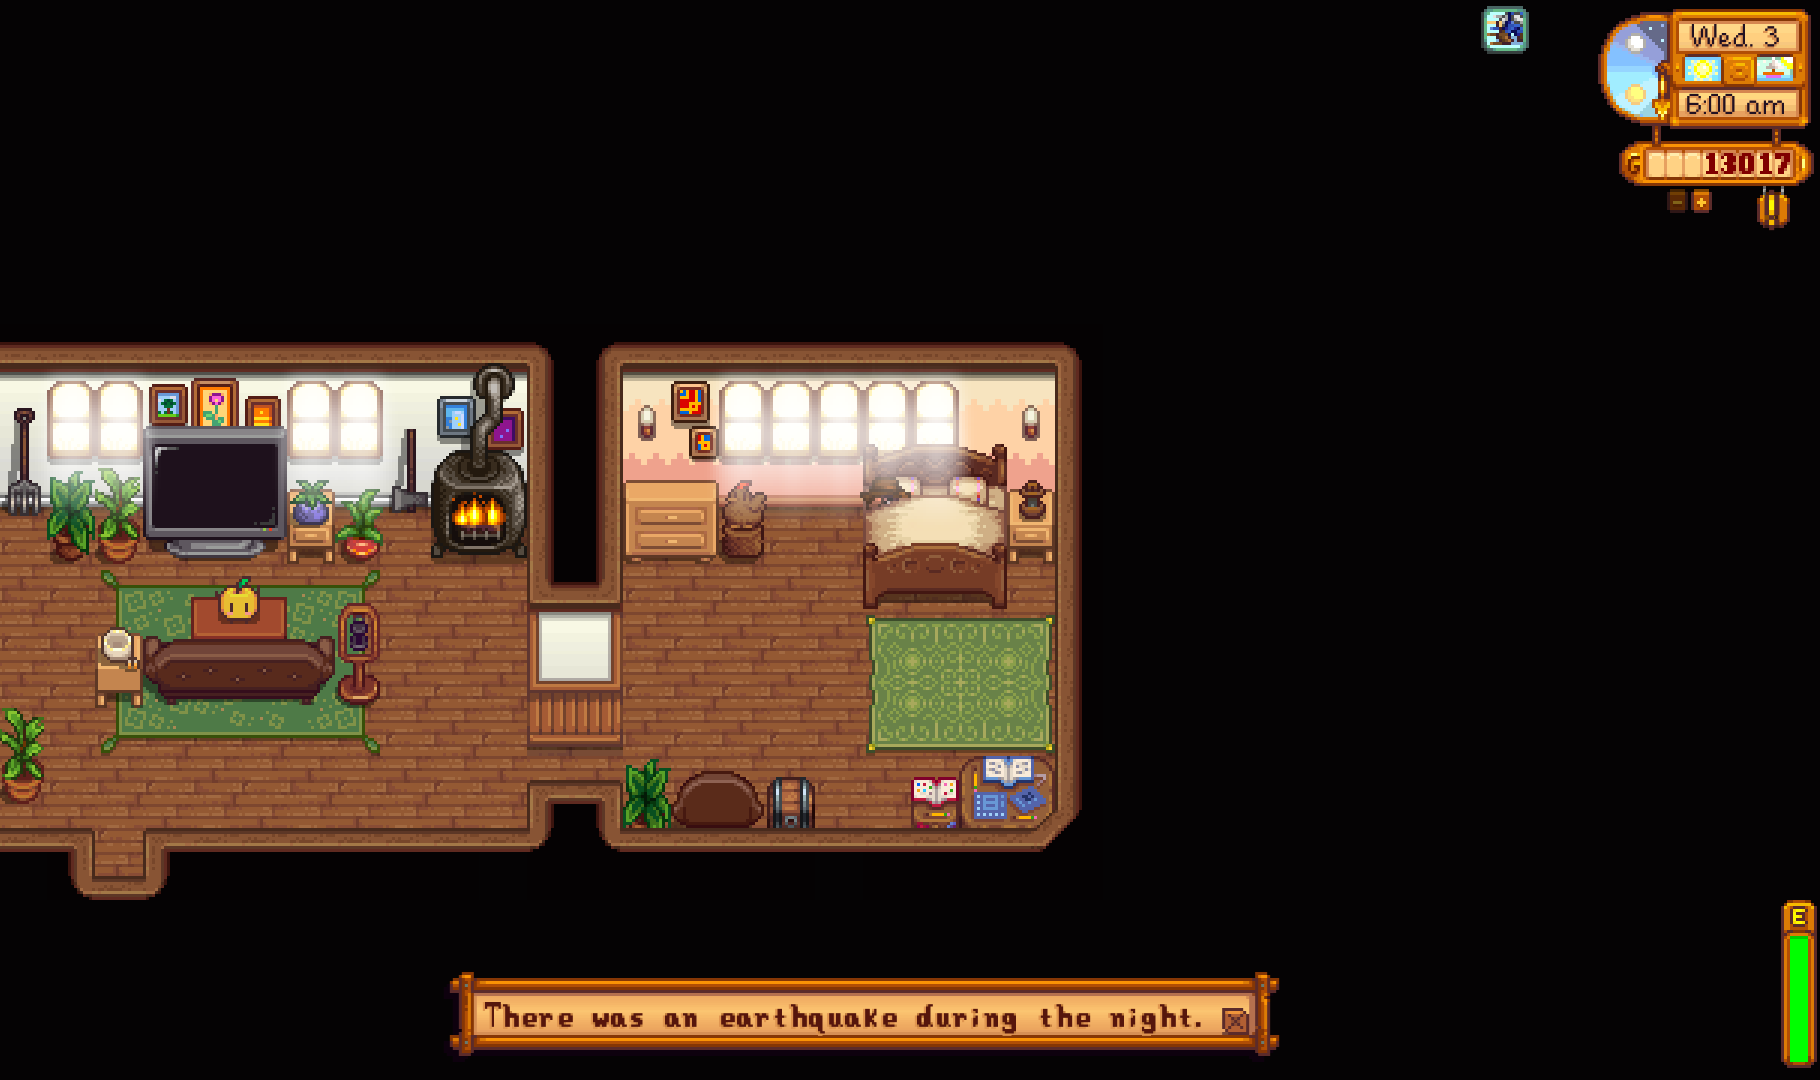 Stardew Valley Earthquake Message - there was an earthquake during the night